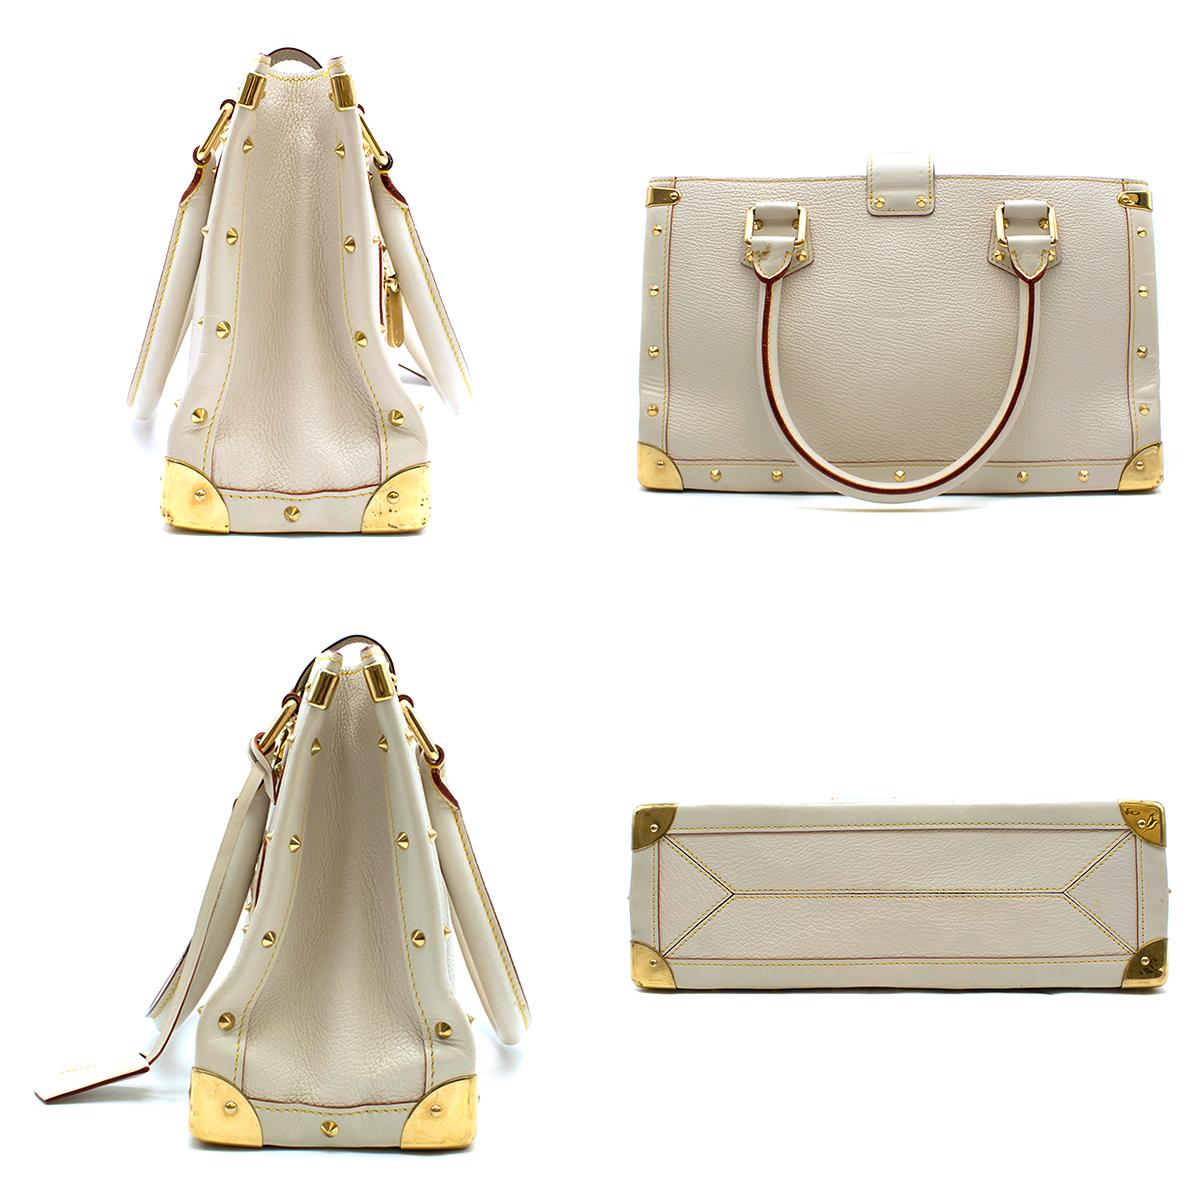 Louis Vuitton Ivory Leather Suhali Le Fabuleux Gold-studded Handbag

- Ivory leather, top-handle handbag
- Gold-tone hardware
-Gold-studded detail
- Tubular handles
- Flap push-botton closure engraved with signature logo
- Front zip pocket
- Leather